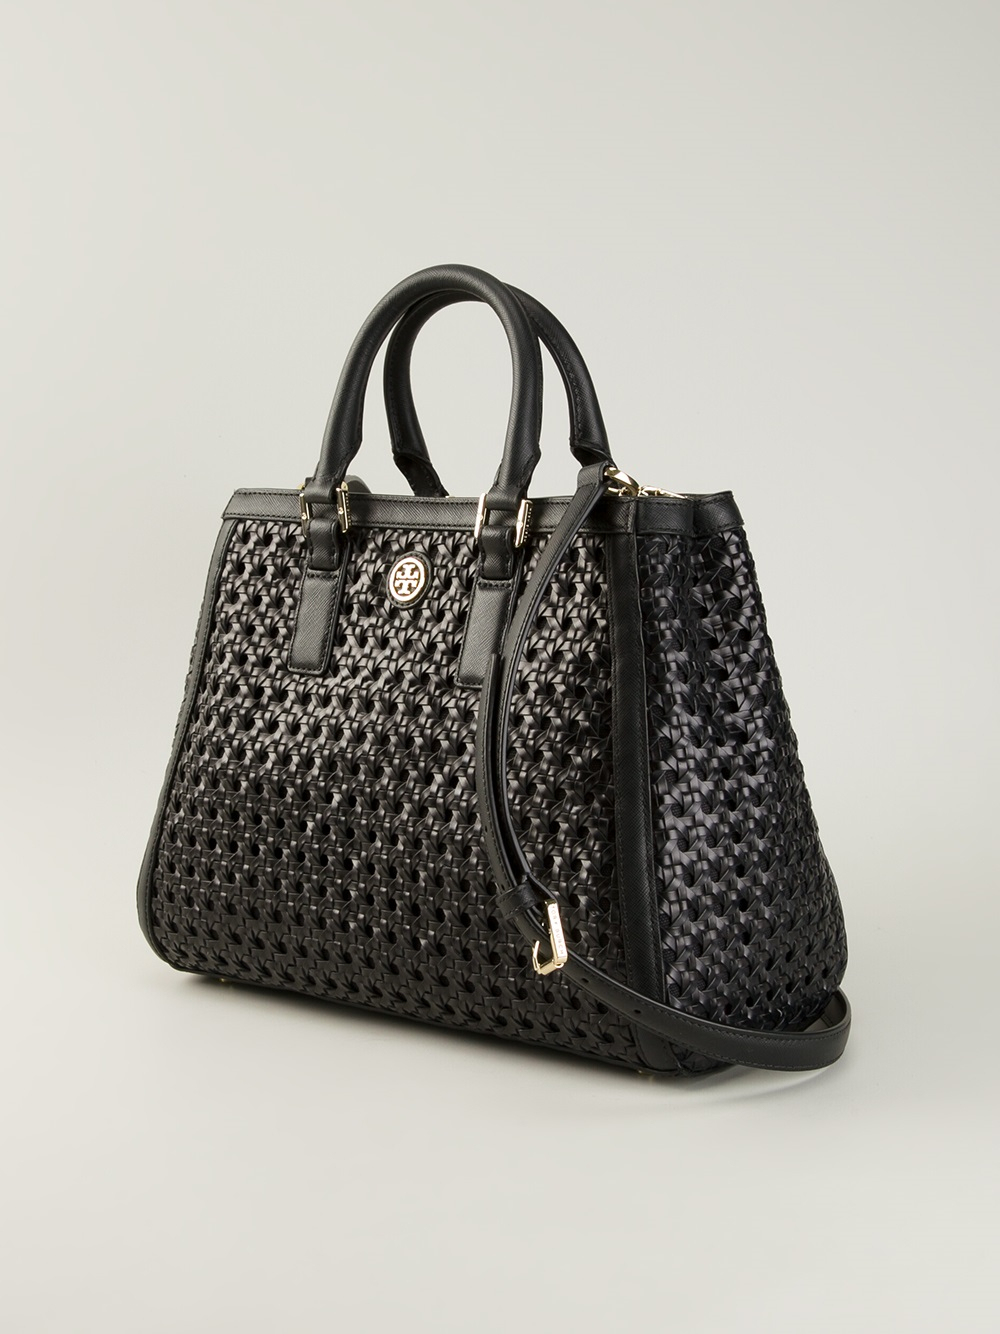 Tory Burch Woven Tote Bag in Black | Lyst